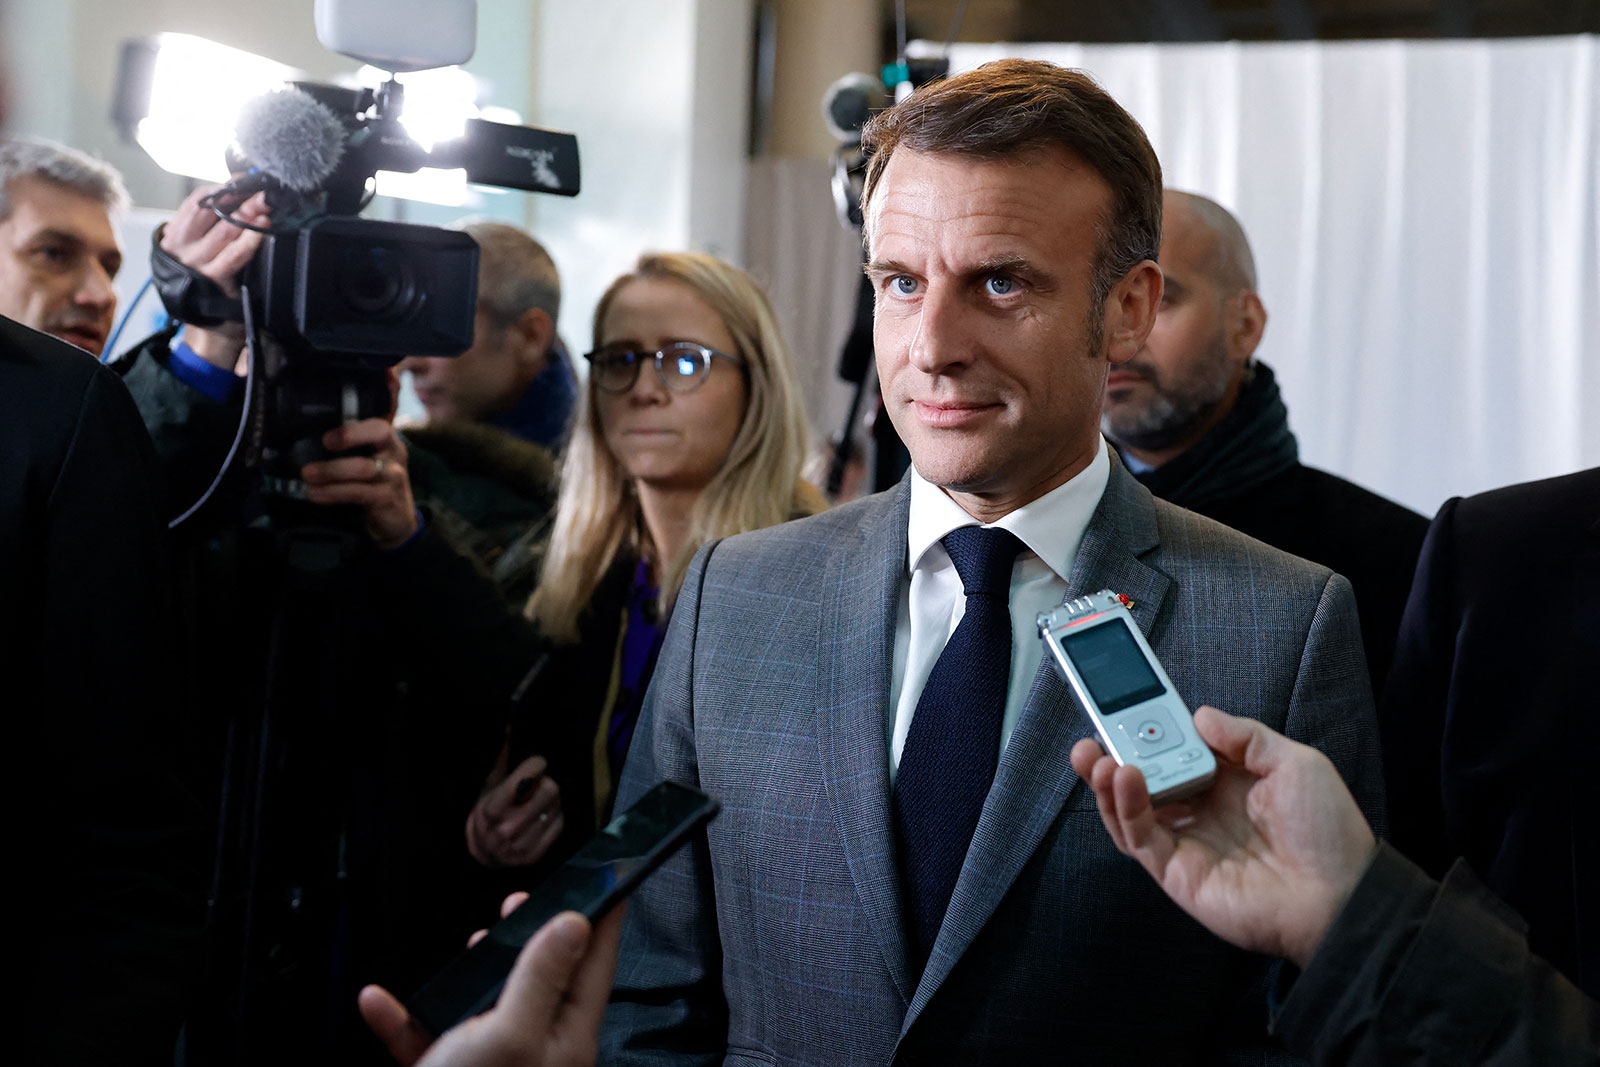 France's President Emmanuel Macron speaks to press at EU headquarters in Brussels on Wednesday.